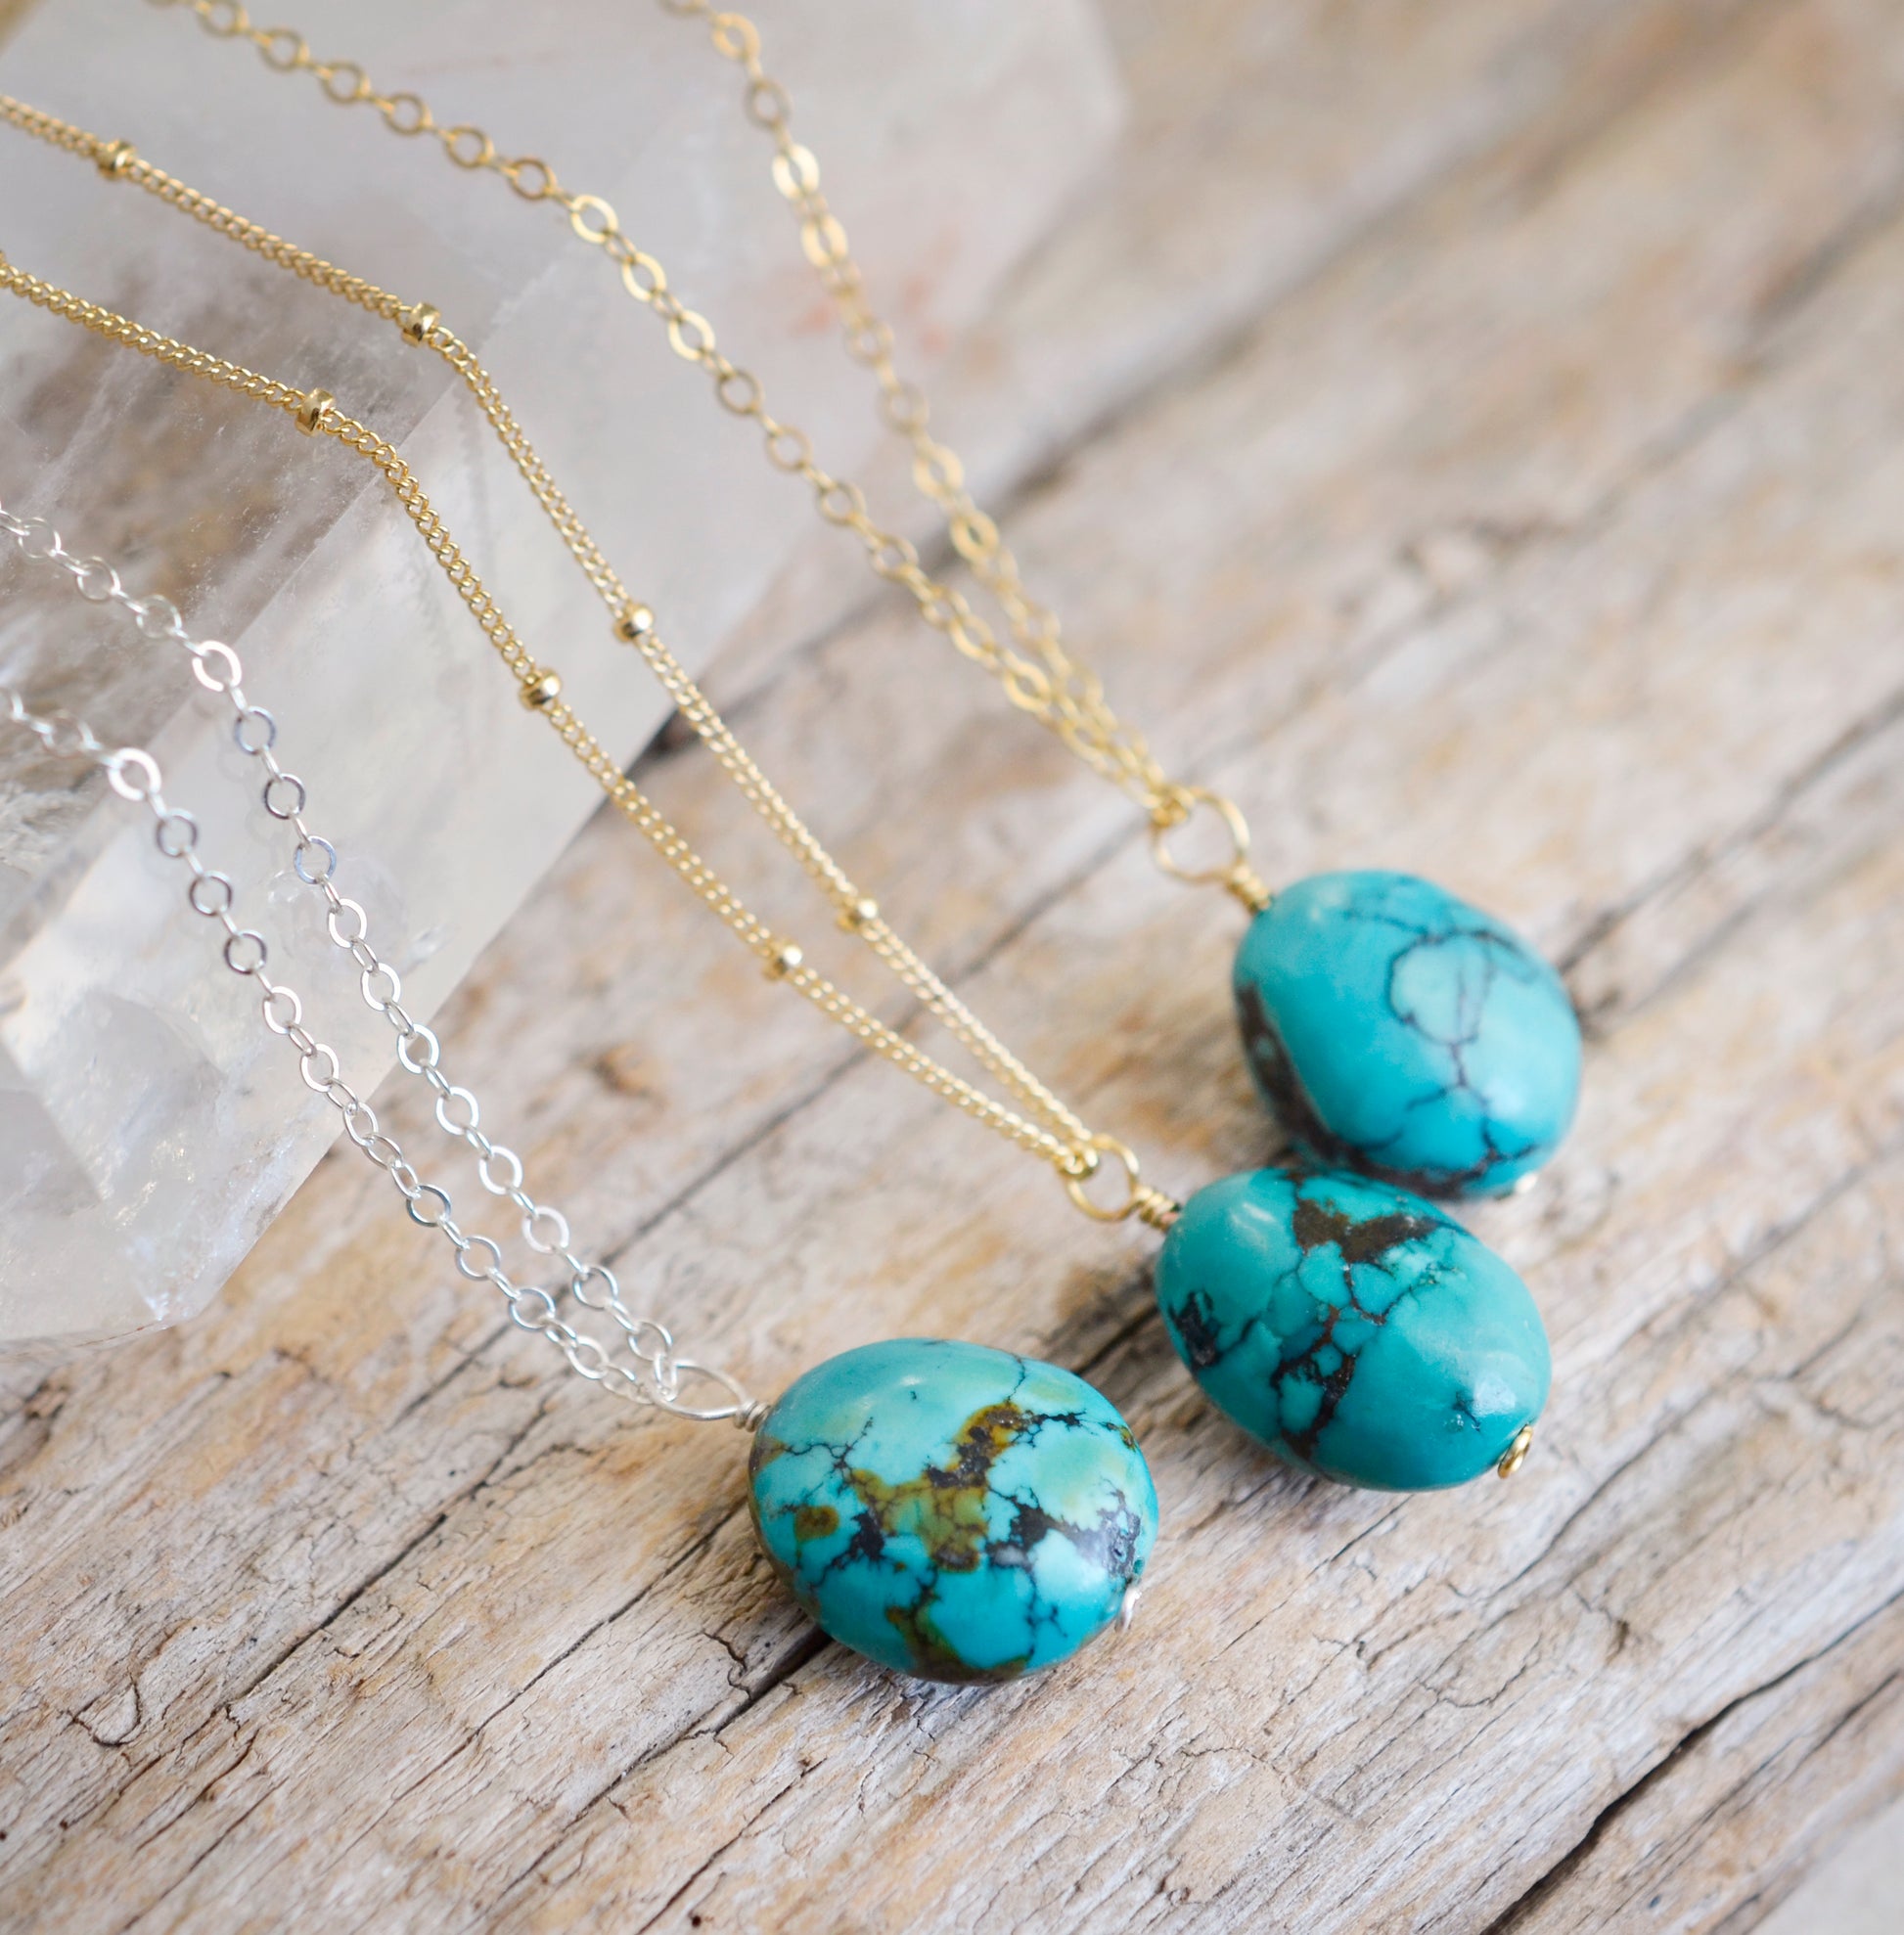 Genuine Turquoise Necklace, Natural Chunky Turquoise Pendant, December Birthstone, Sterling Silver or Gold Filled